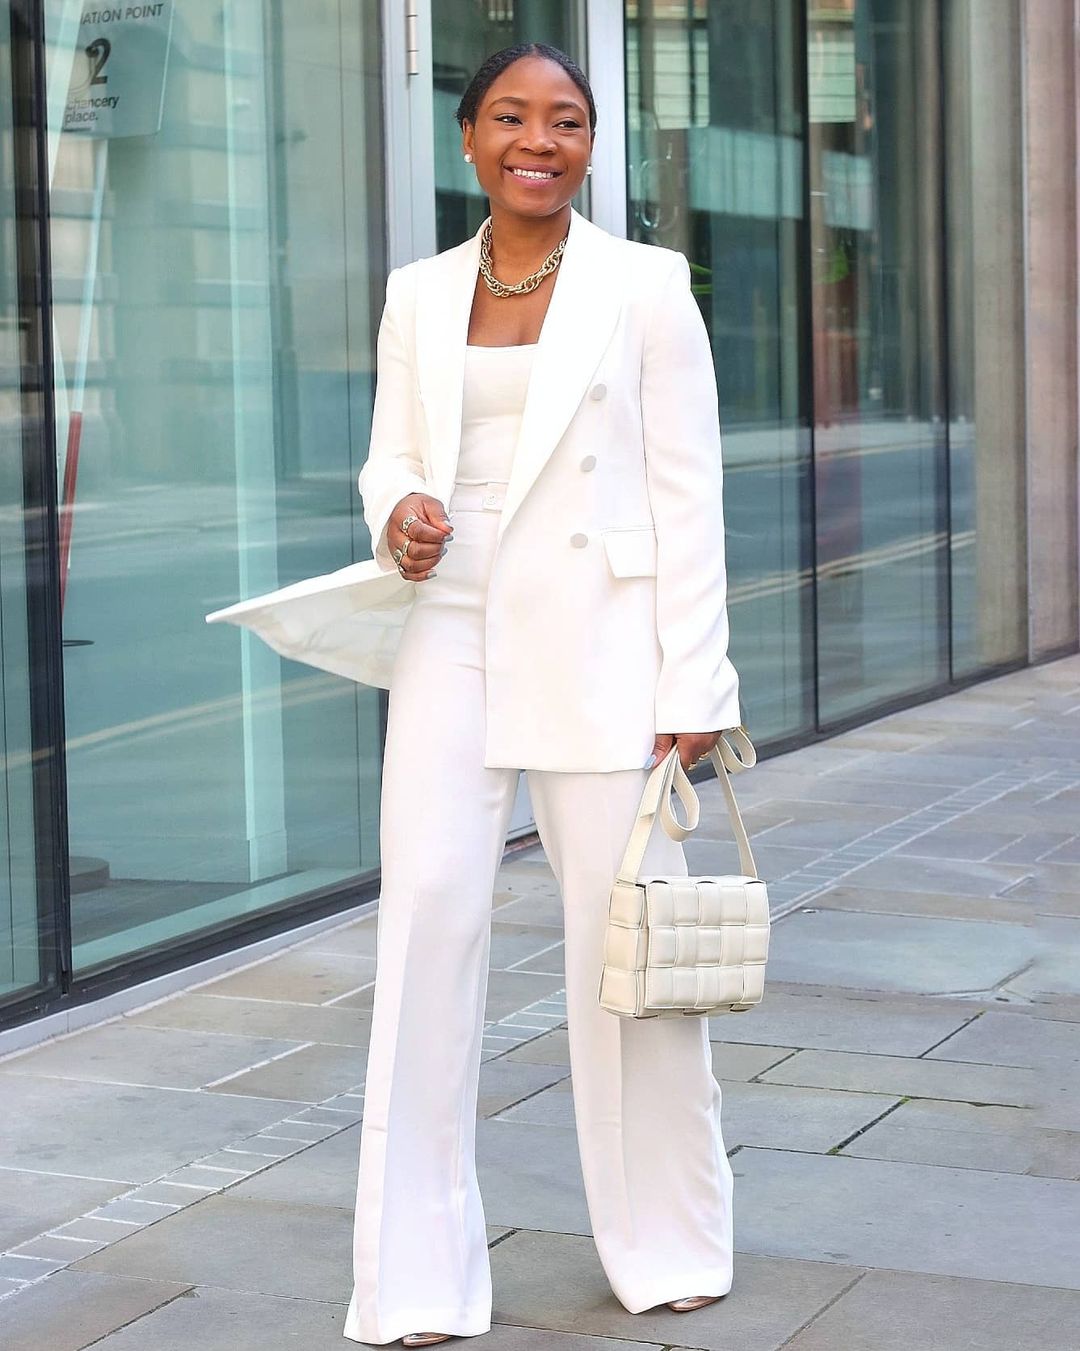 Damilola Owoade's Style Guide To Looking Chic 7 Days Of The Week | BN Style